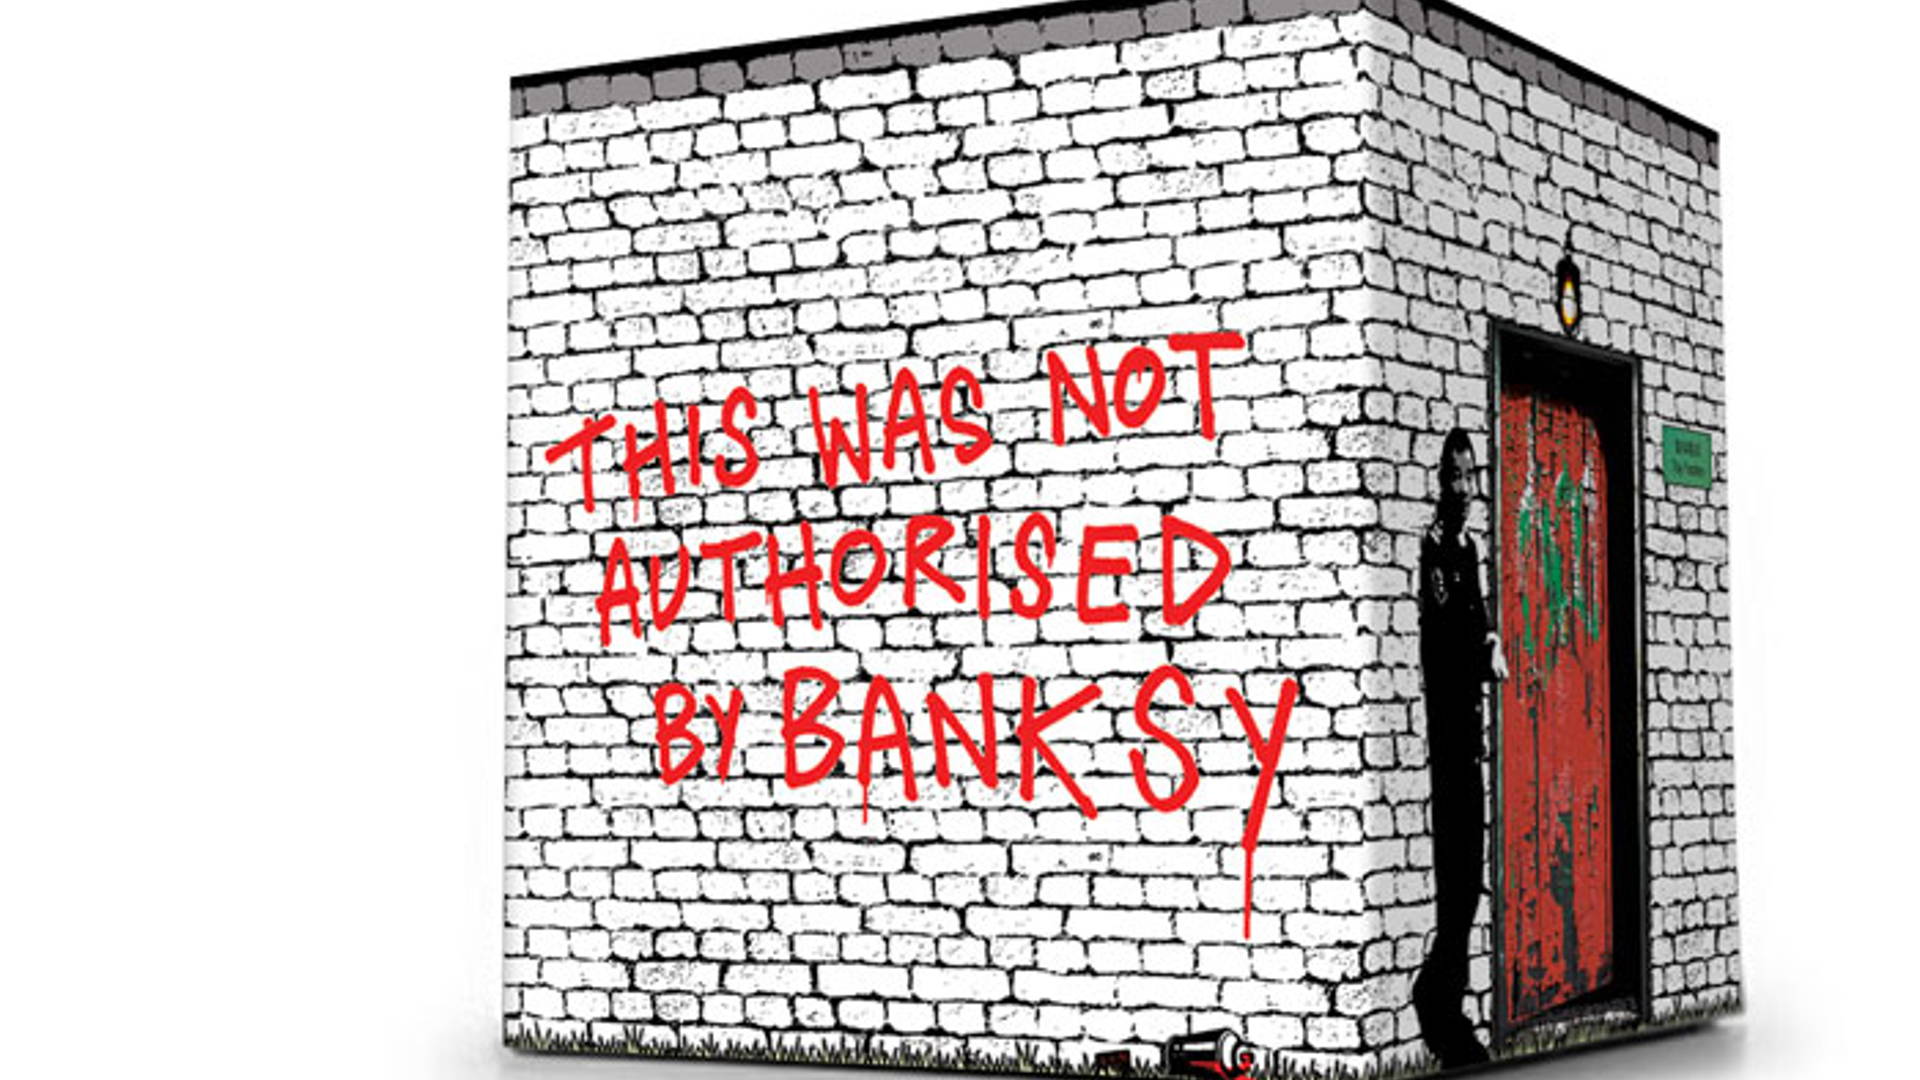 Featured image for Limited Edition Banksy Figurine Designed by Artist, Mike Leavitt